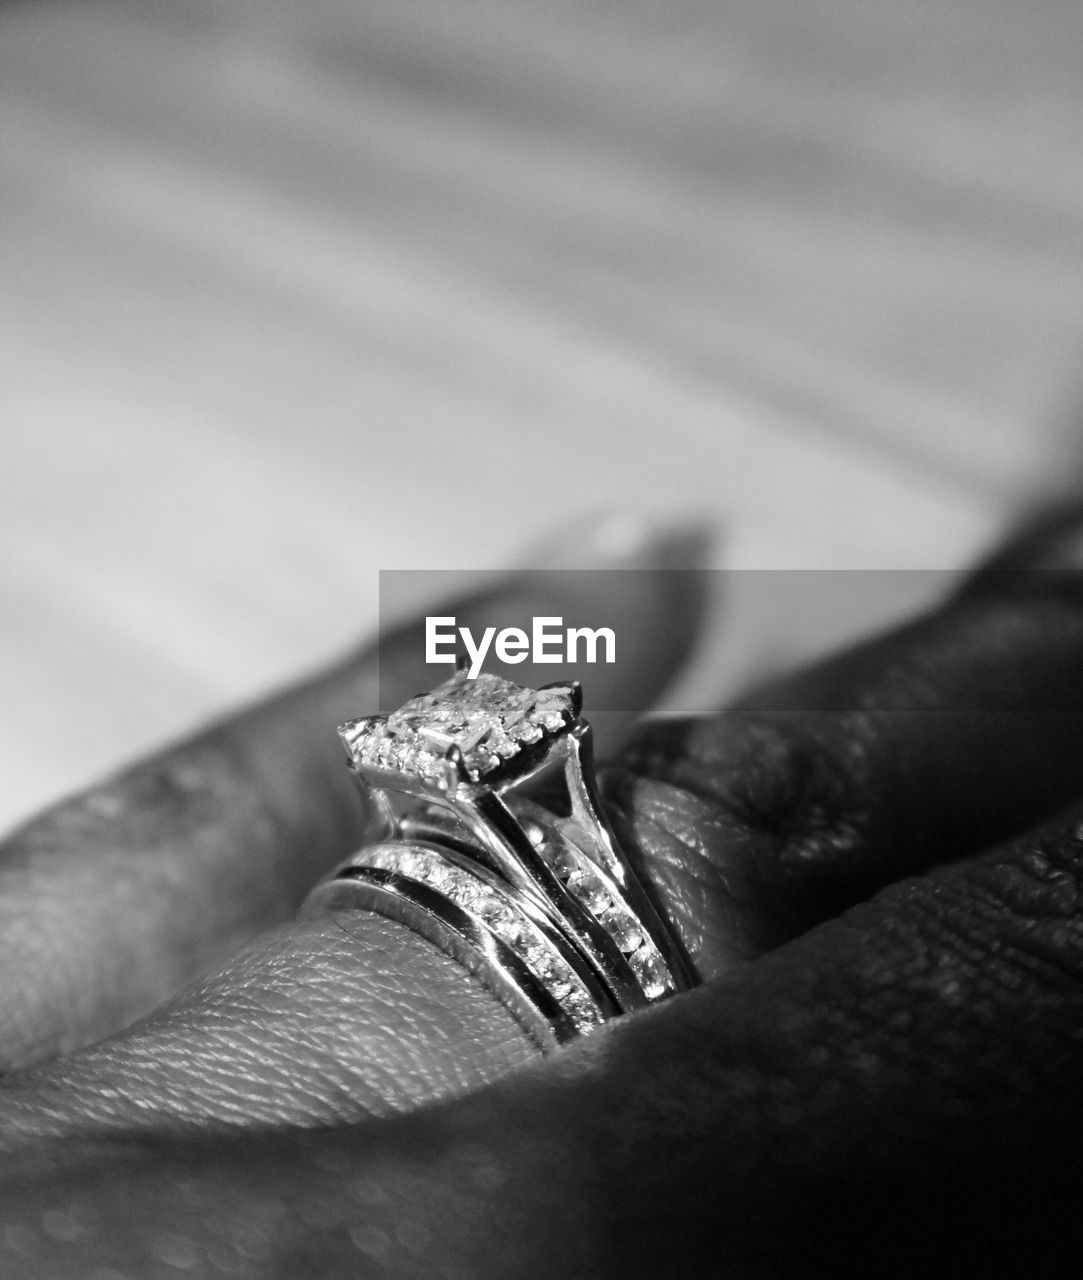 Cropped image of hand wearing shiny ring